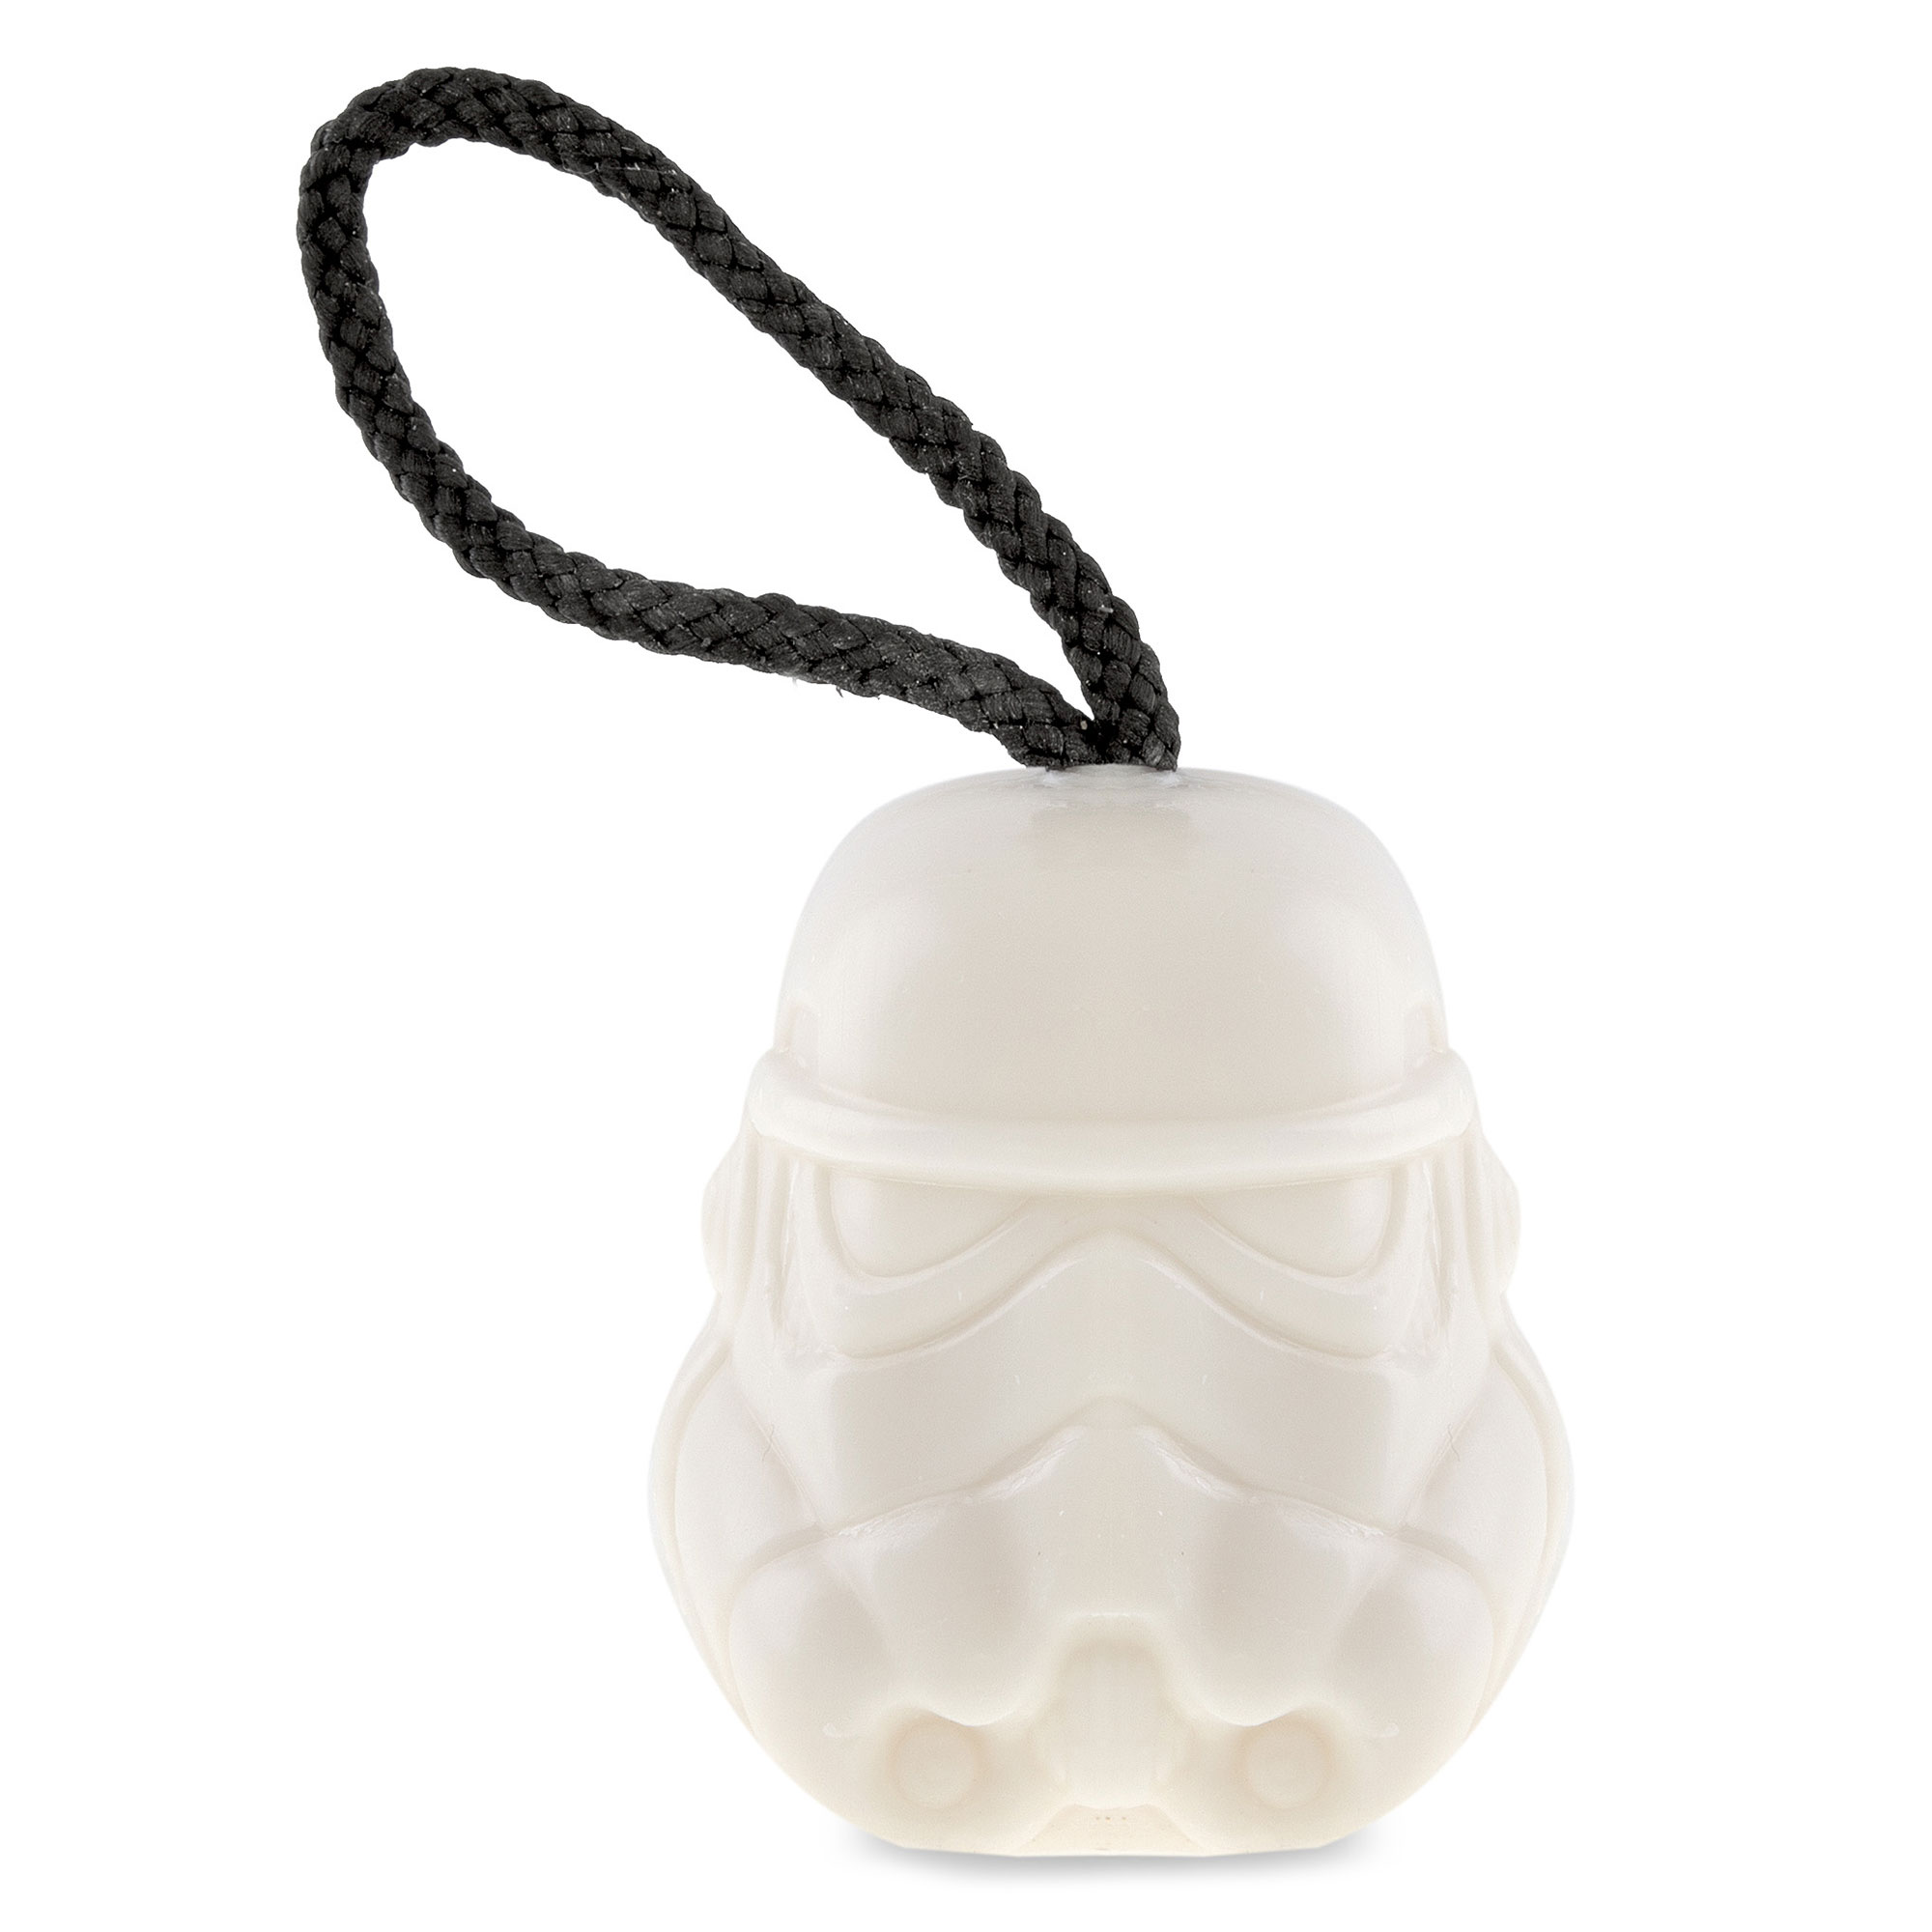 Star Wars Storm Trooper Soap on a Rope